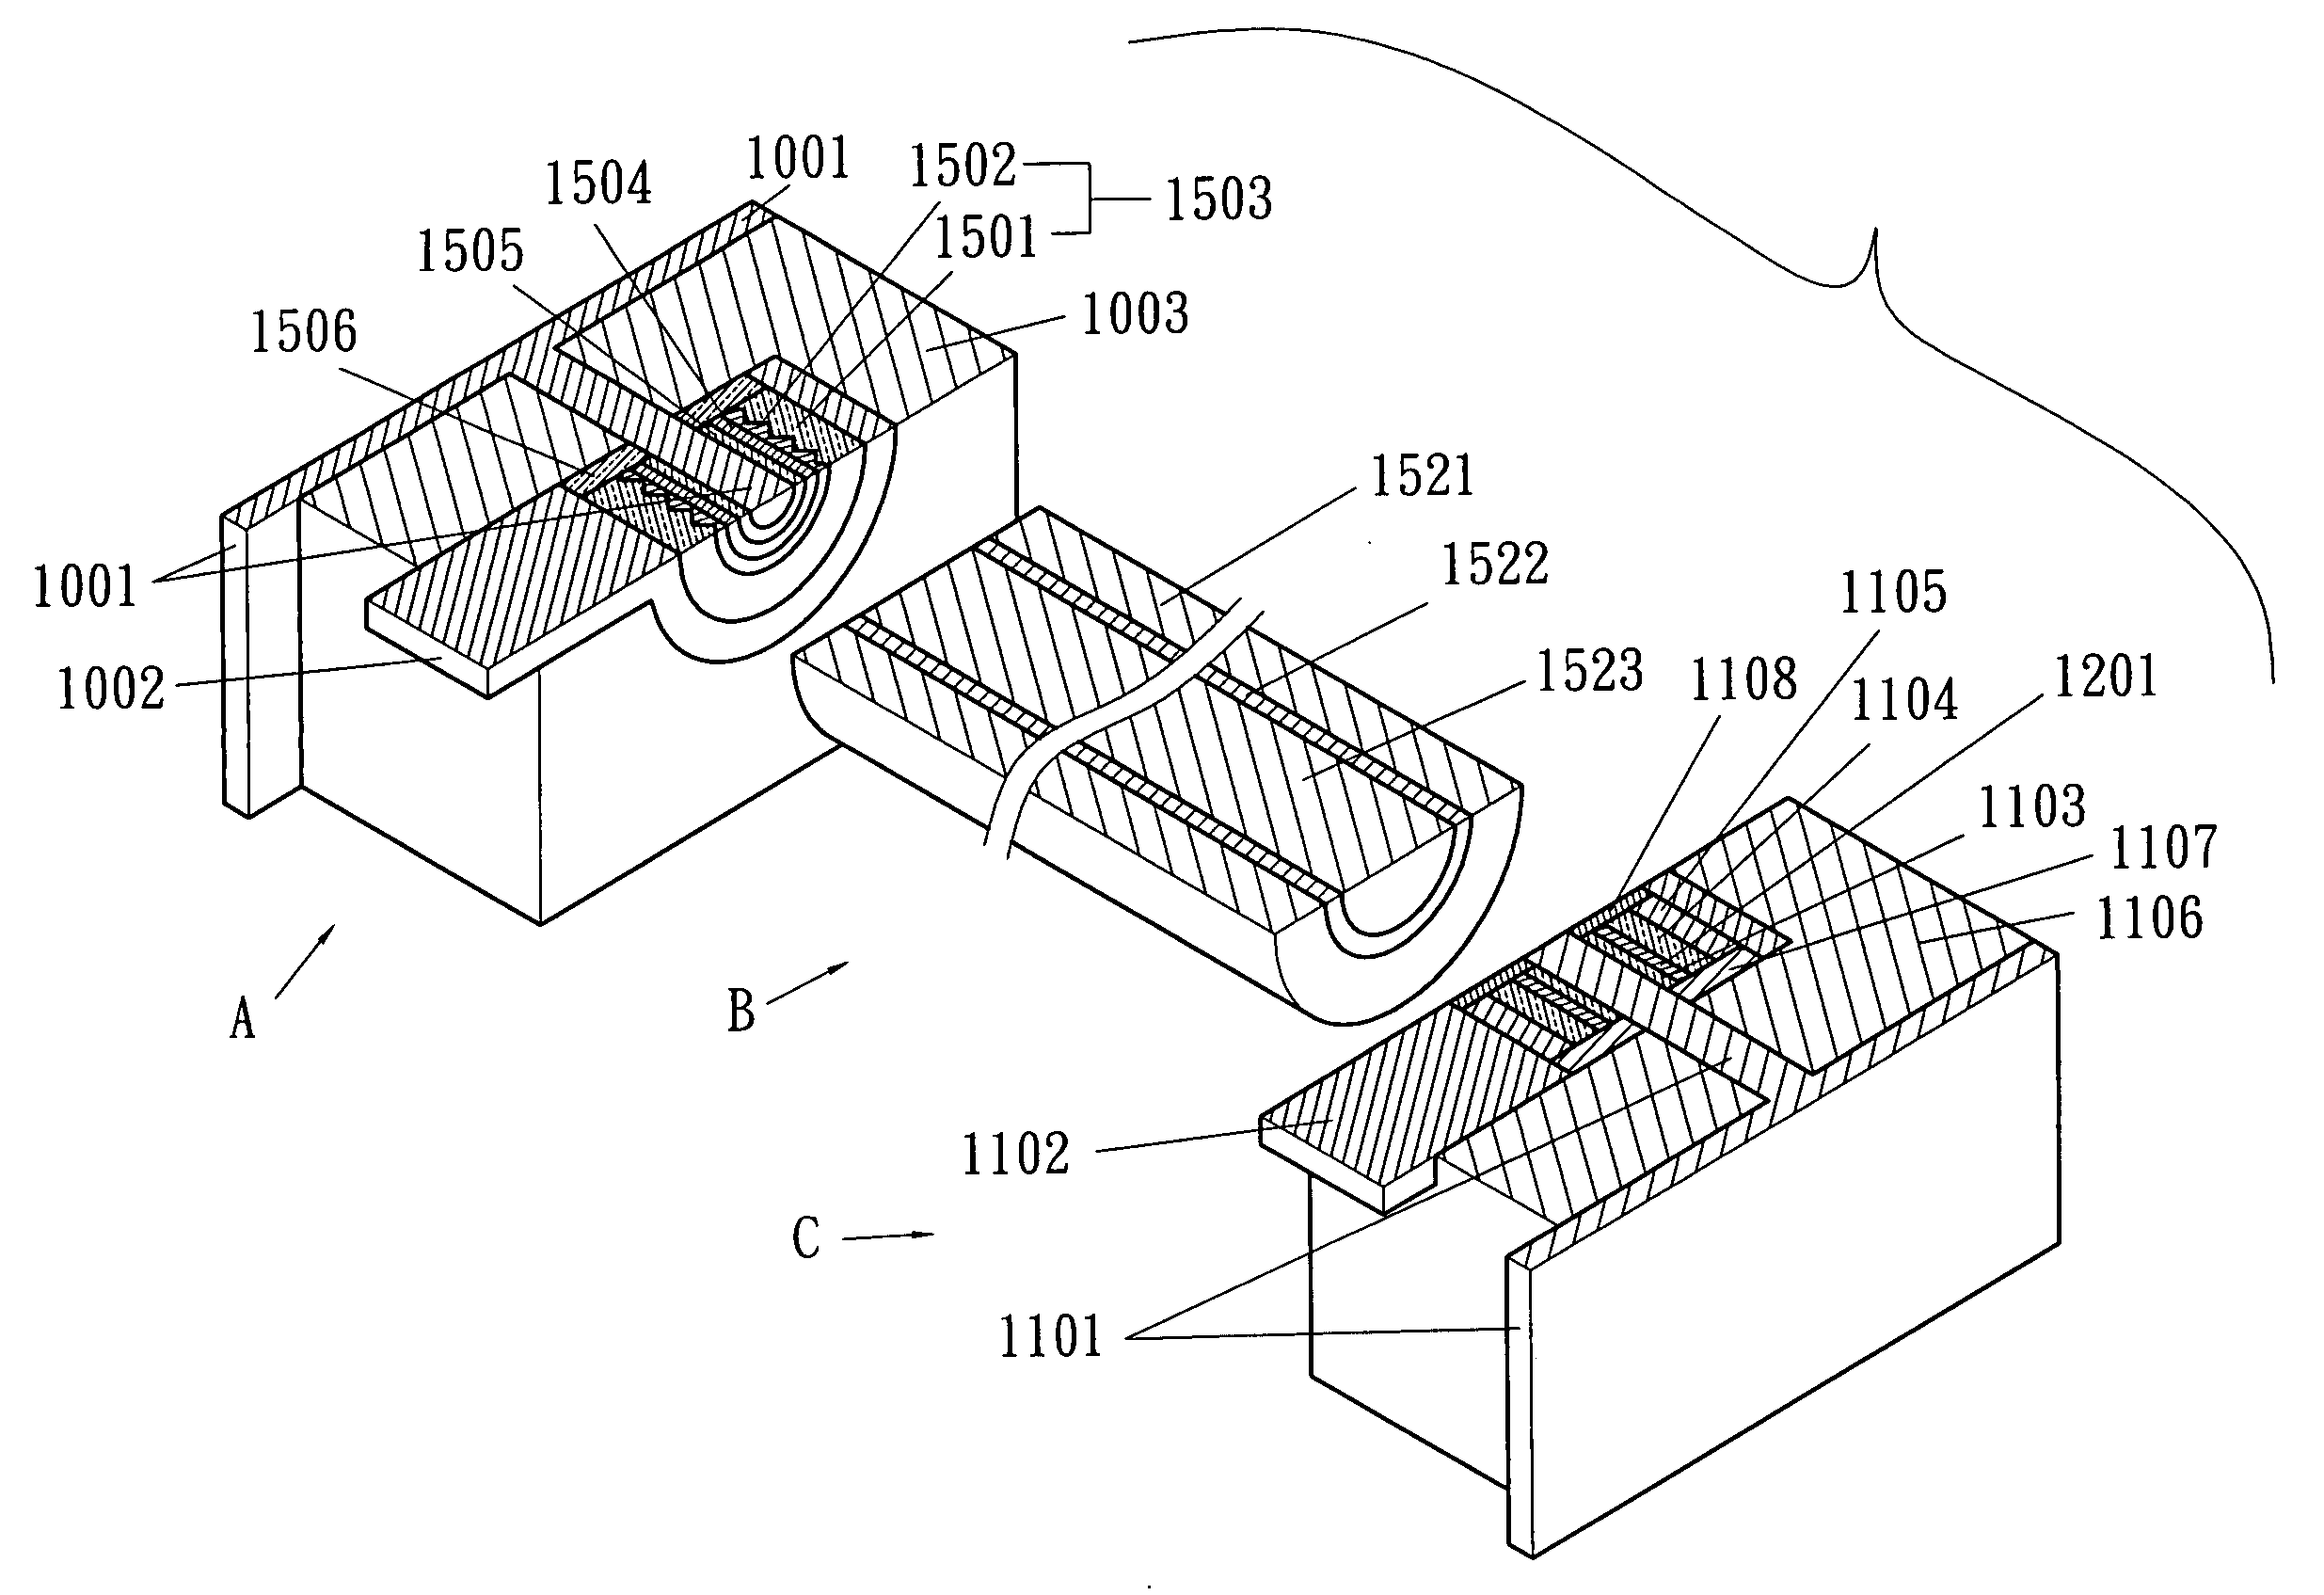 Coaxial light-guide system consisting of coaxial light-guide fiber basing its refractive index profiles on radii and with its coaxial both semiconductor light sources and semiconductor detectors